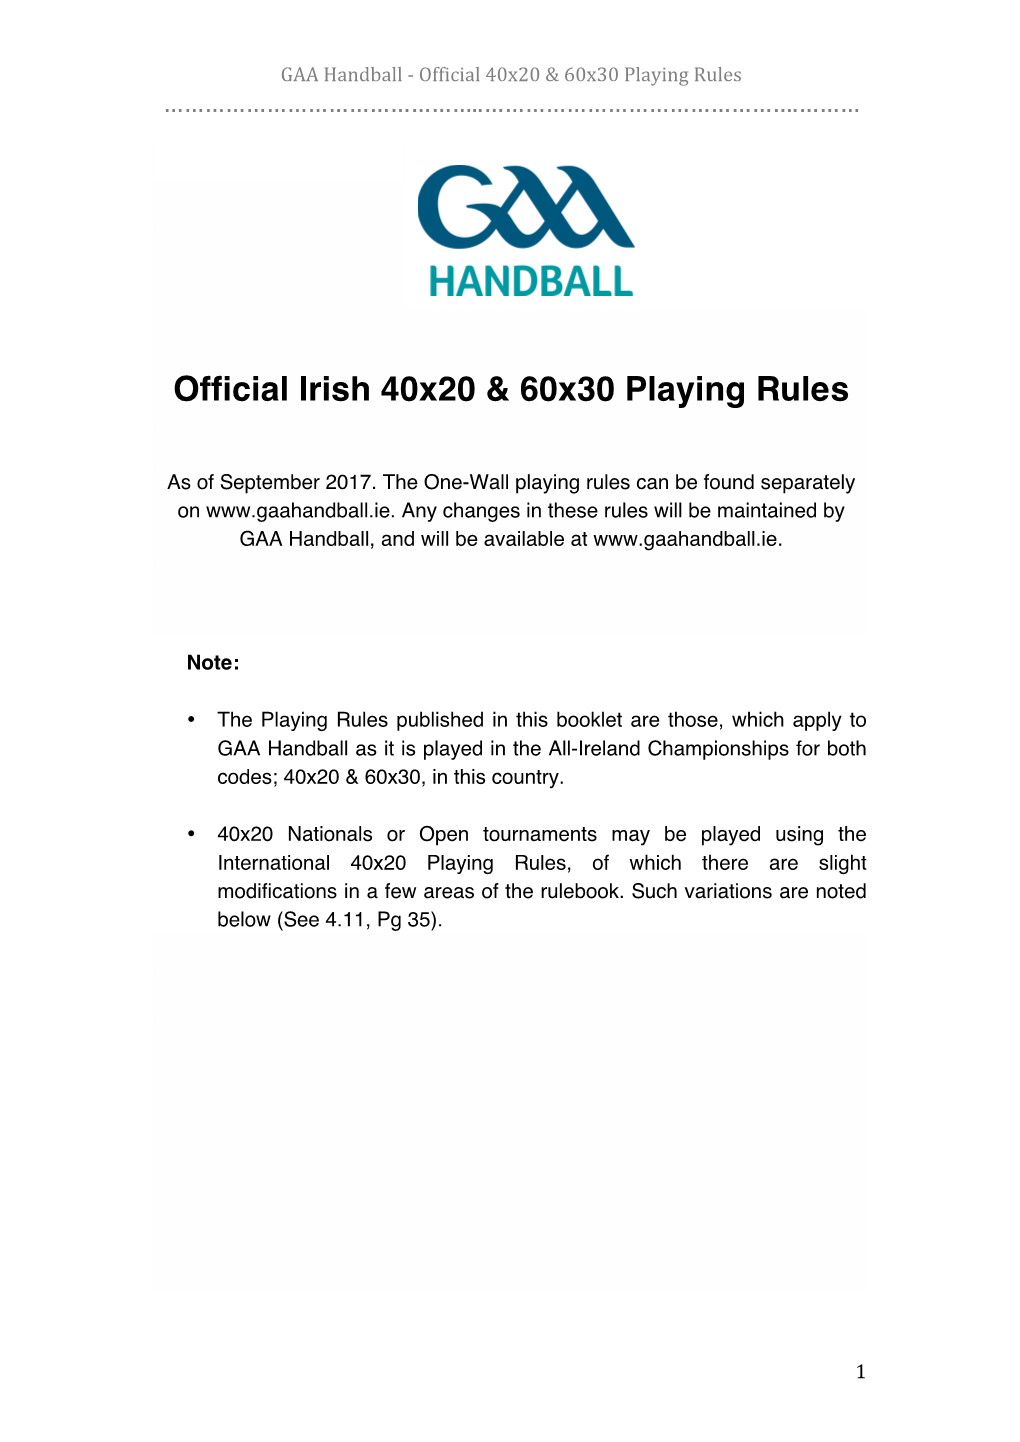 Rules of Handball Place a Presumptive Code of Integrity and Honesty on Each Player